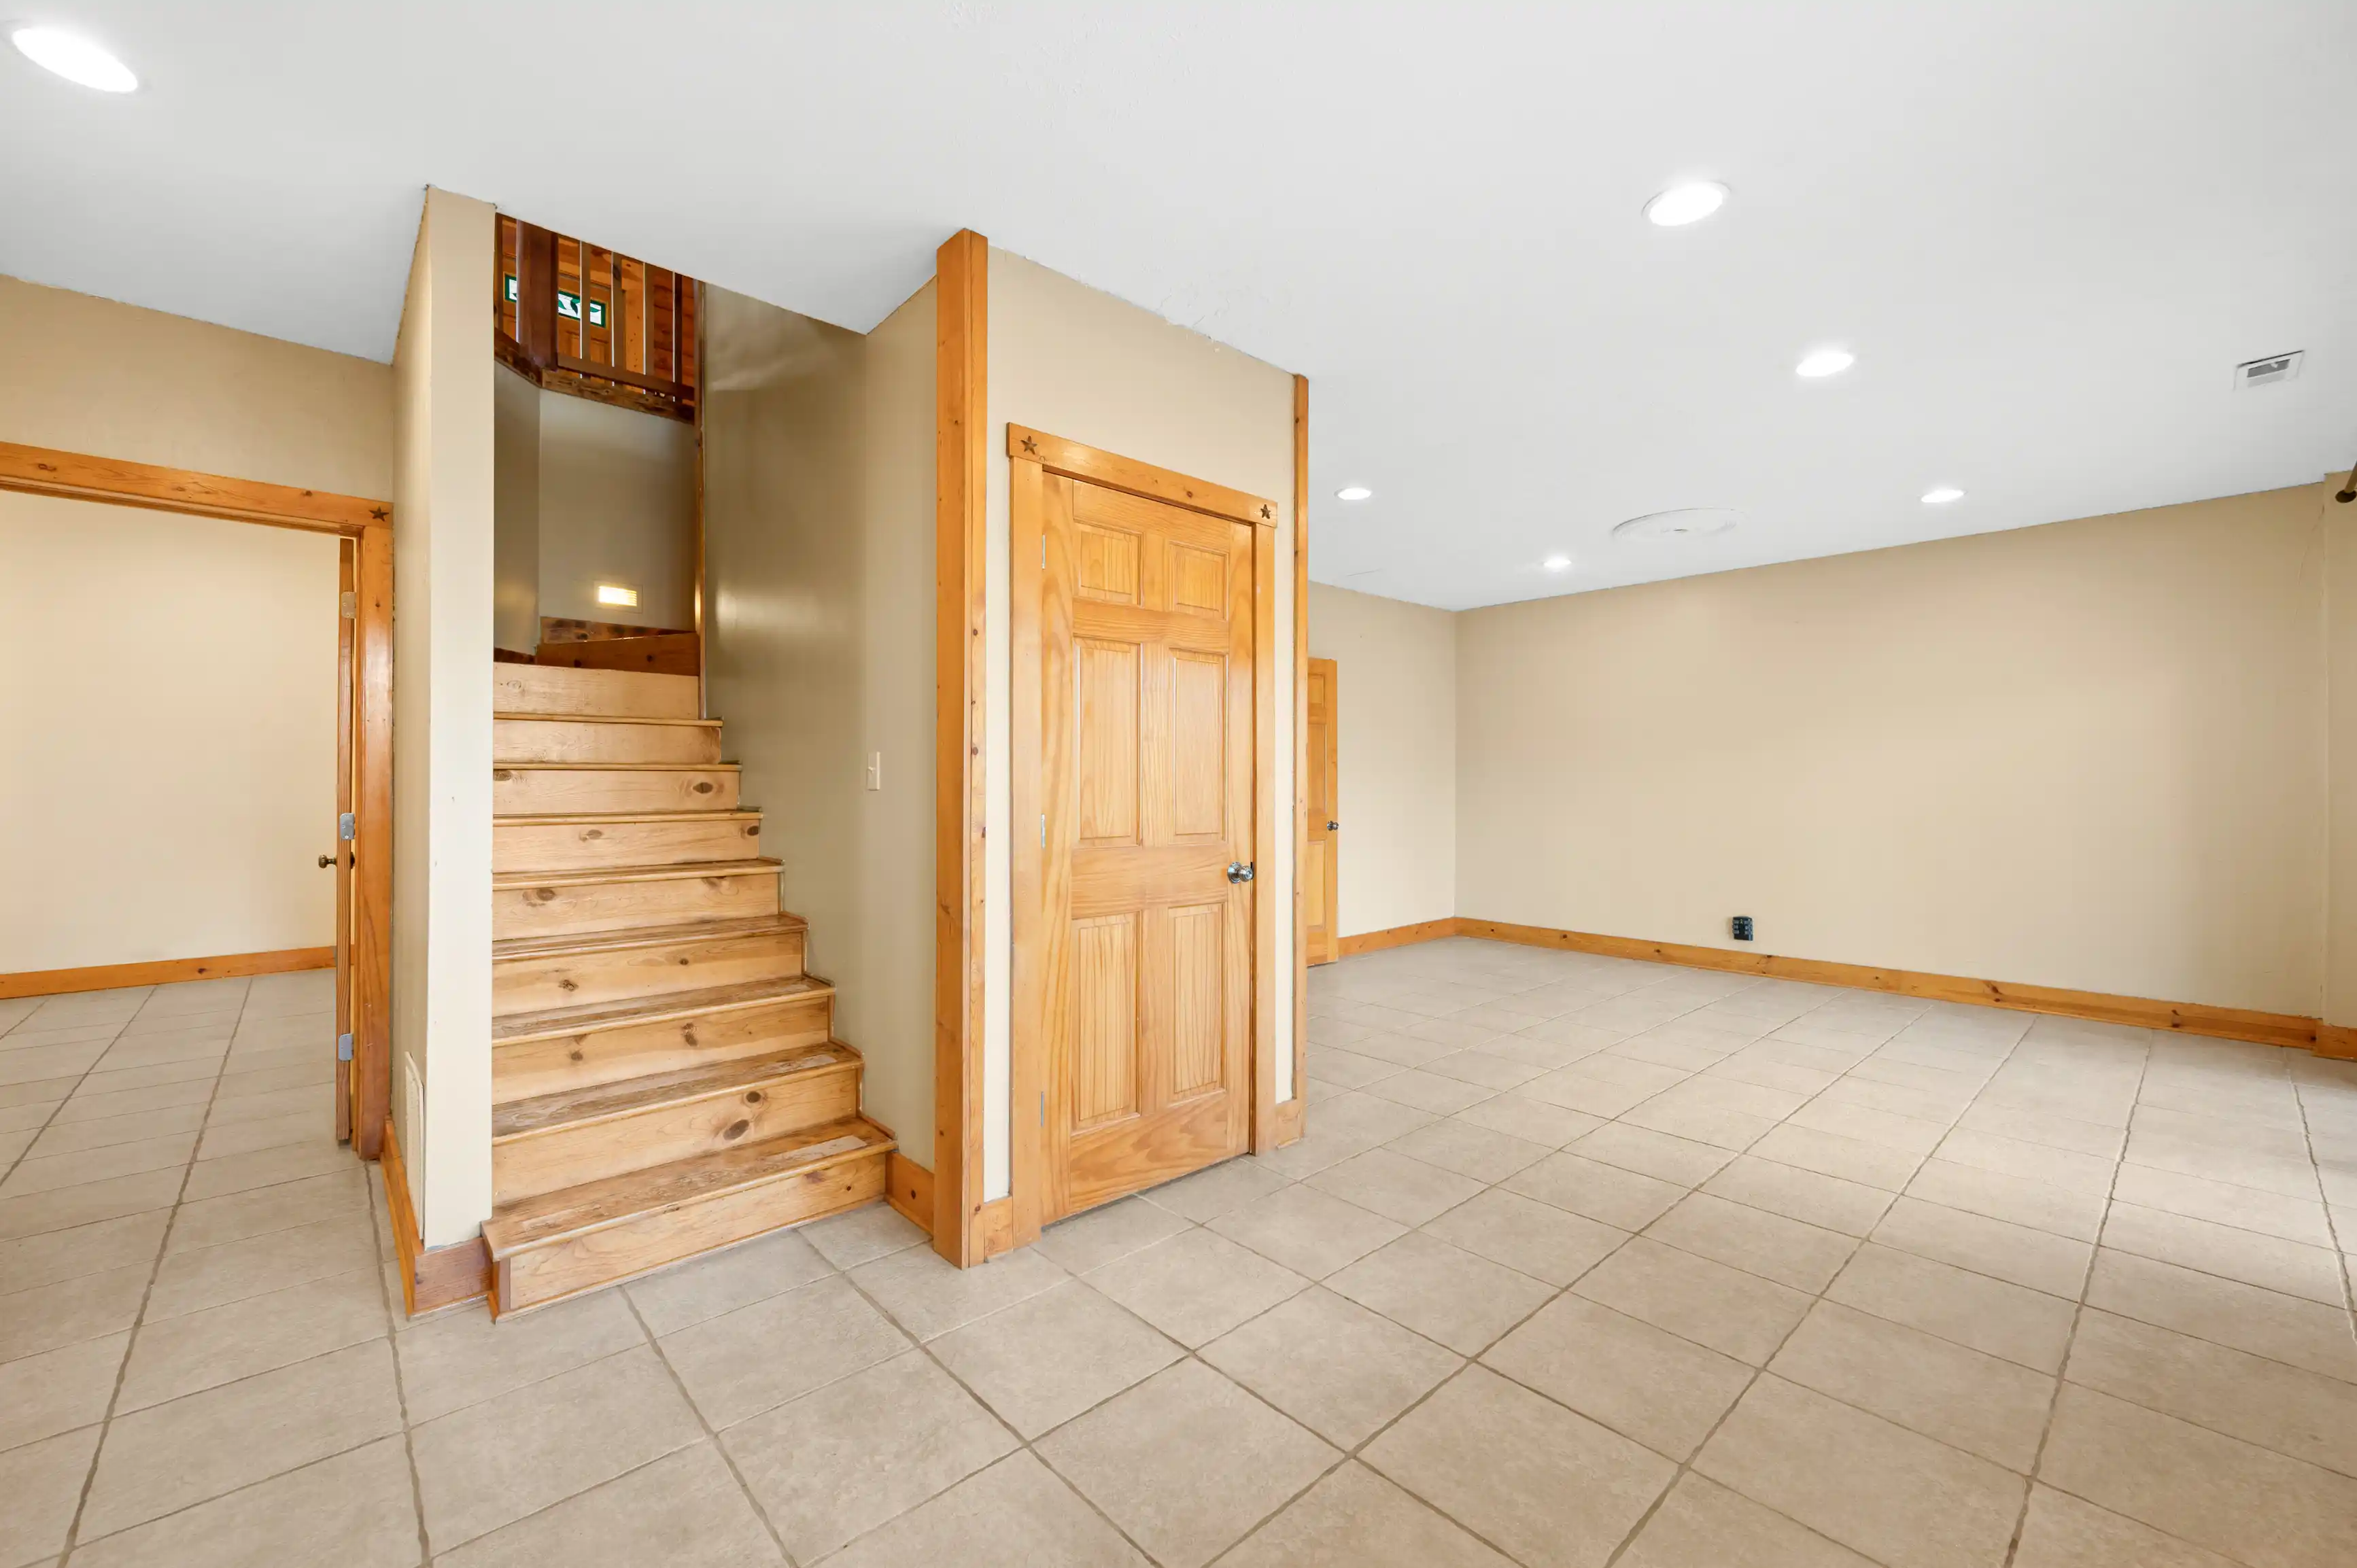 Spacious room with tile flooring, beige walls, wooden doors, and a staircase leading upstairs.